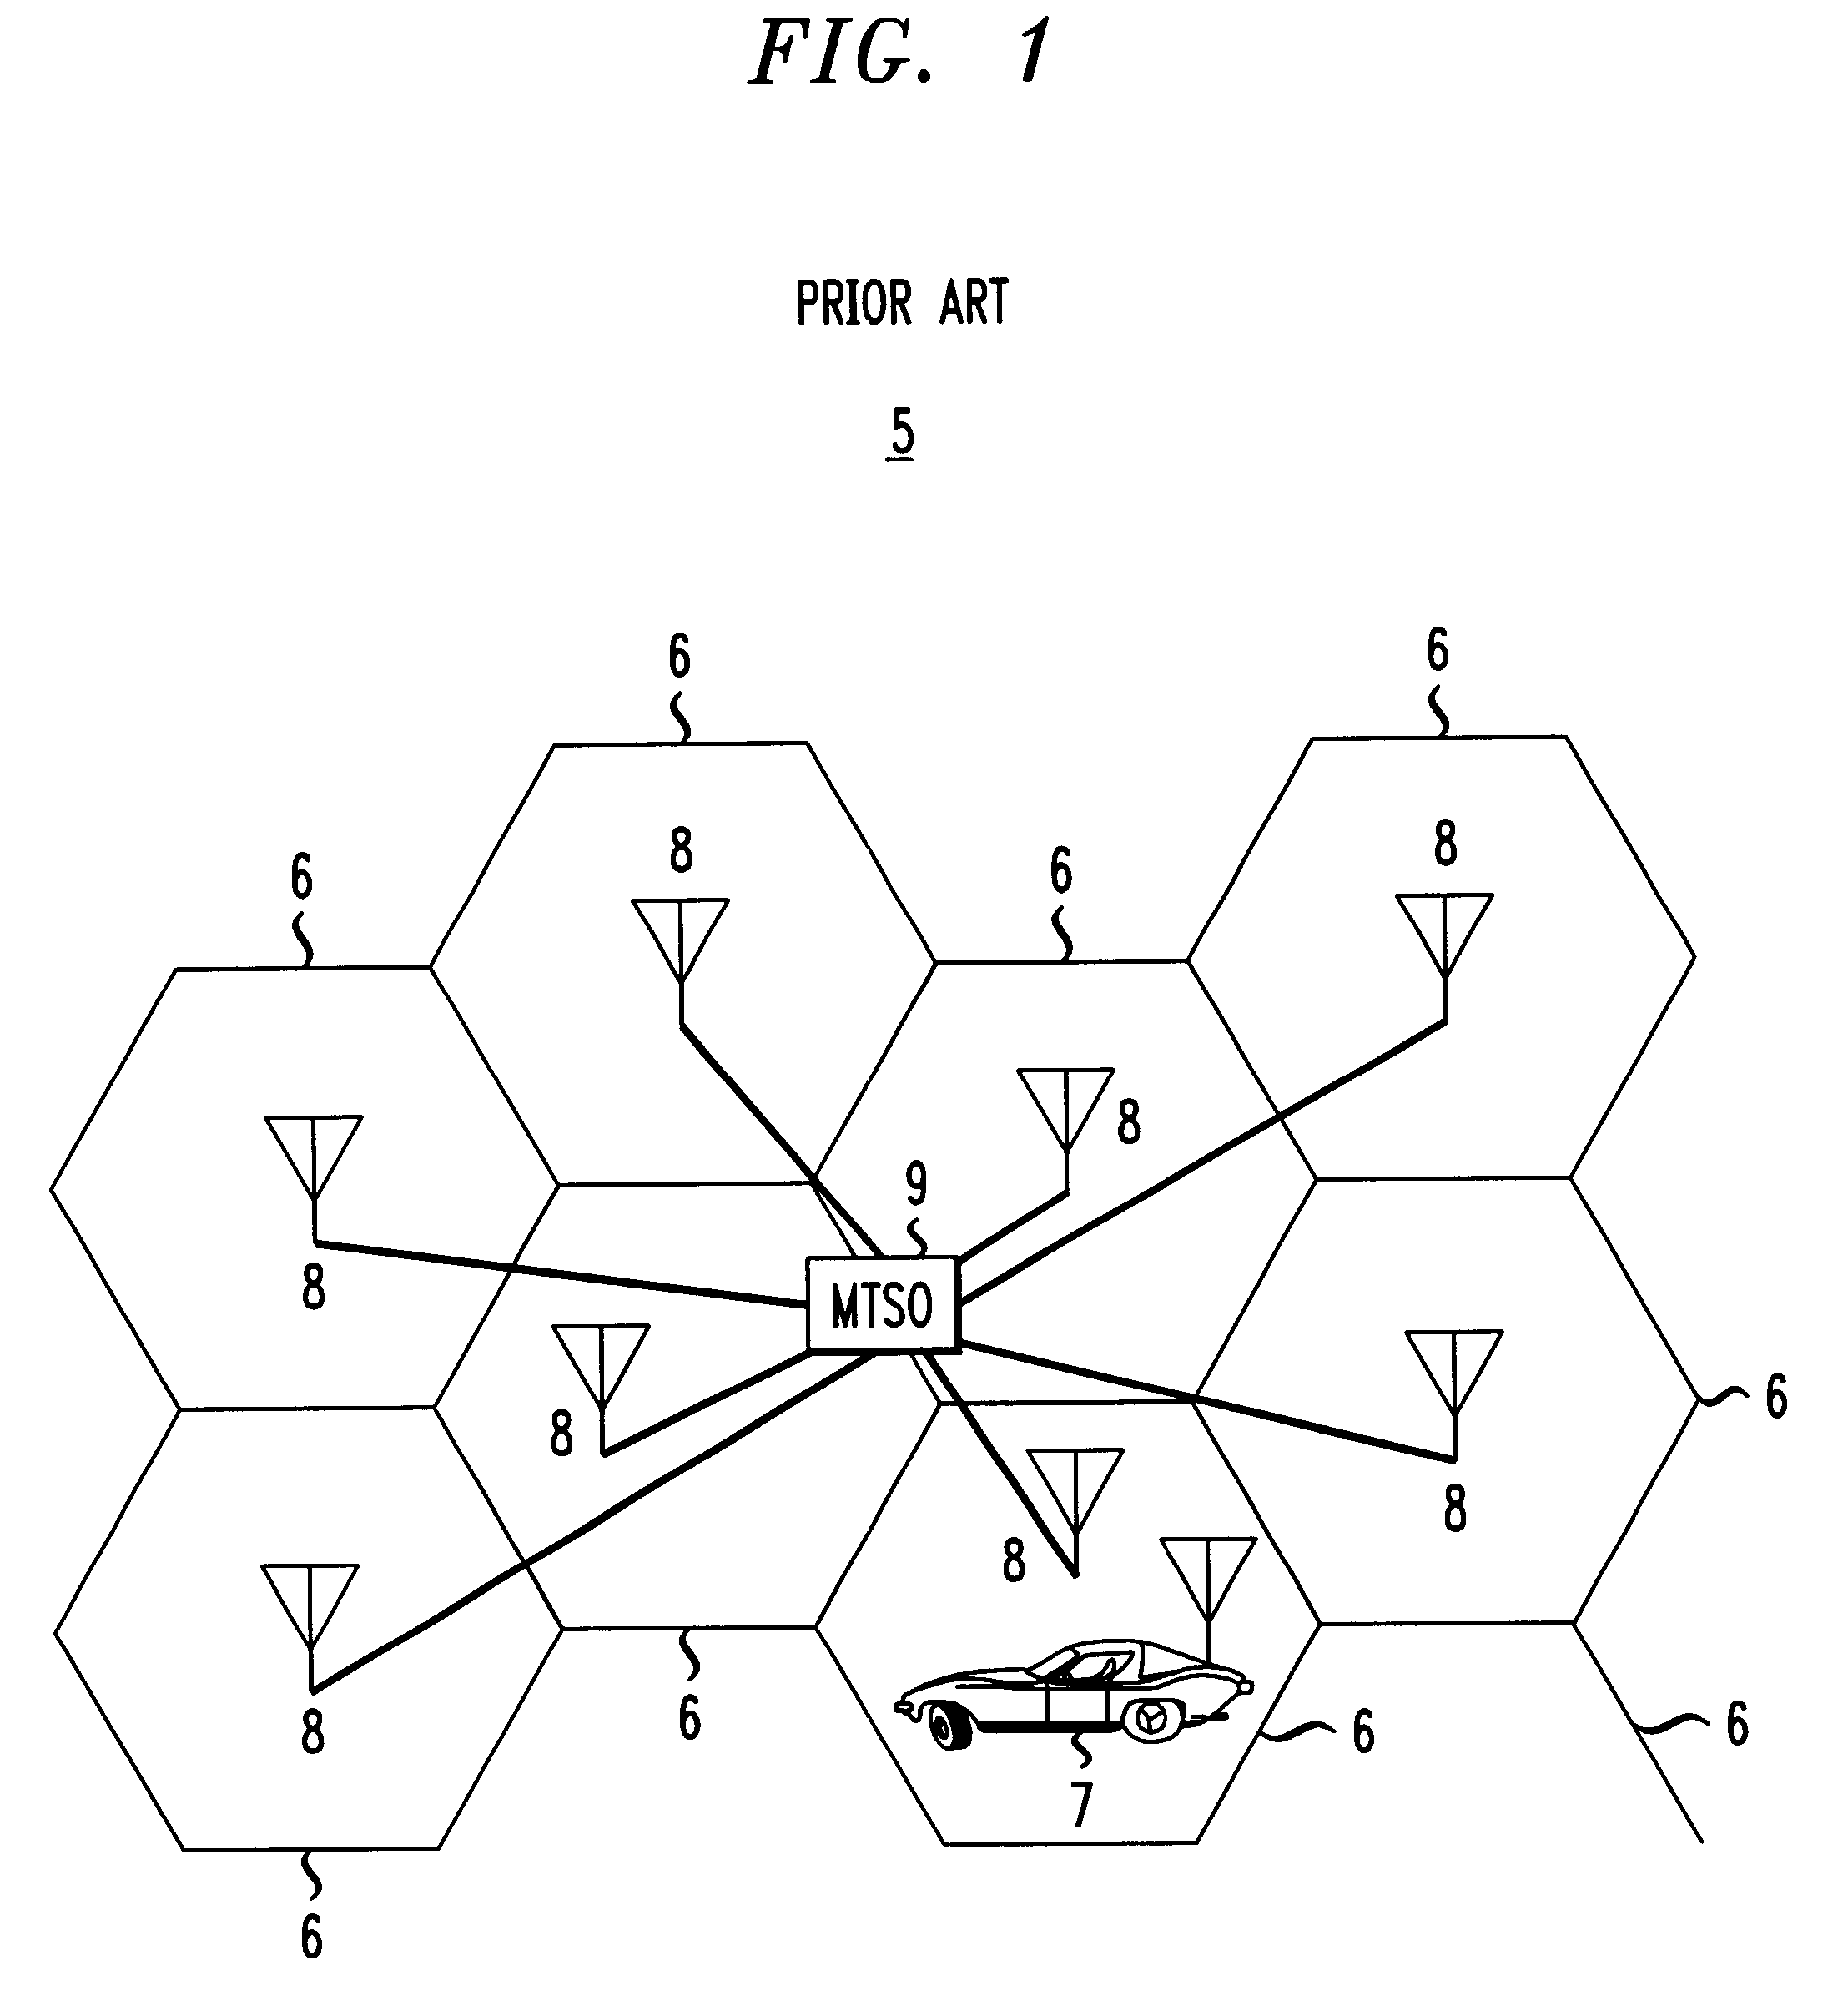 Method and system for optimizing performance of a mobile communication system